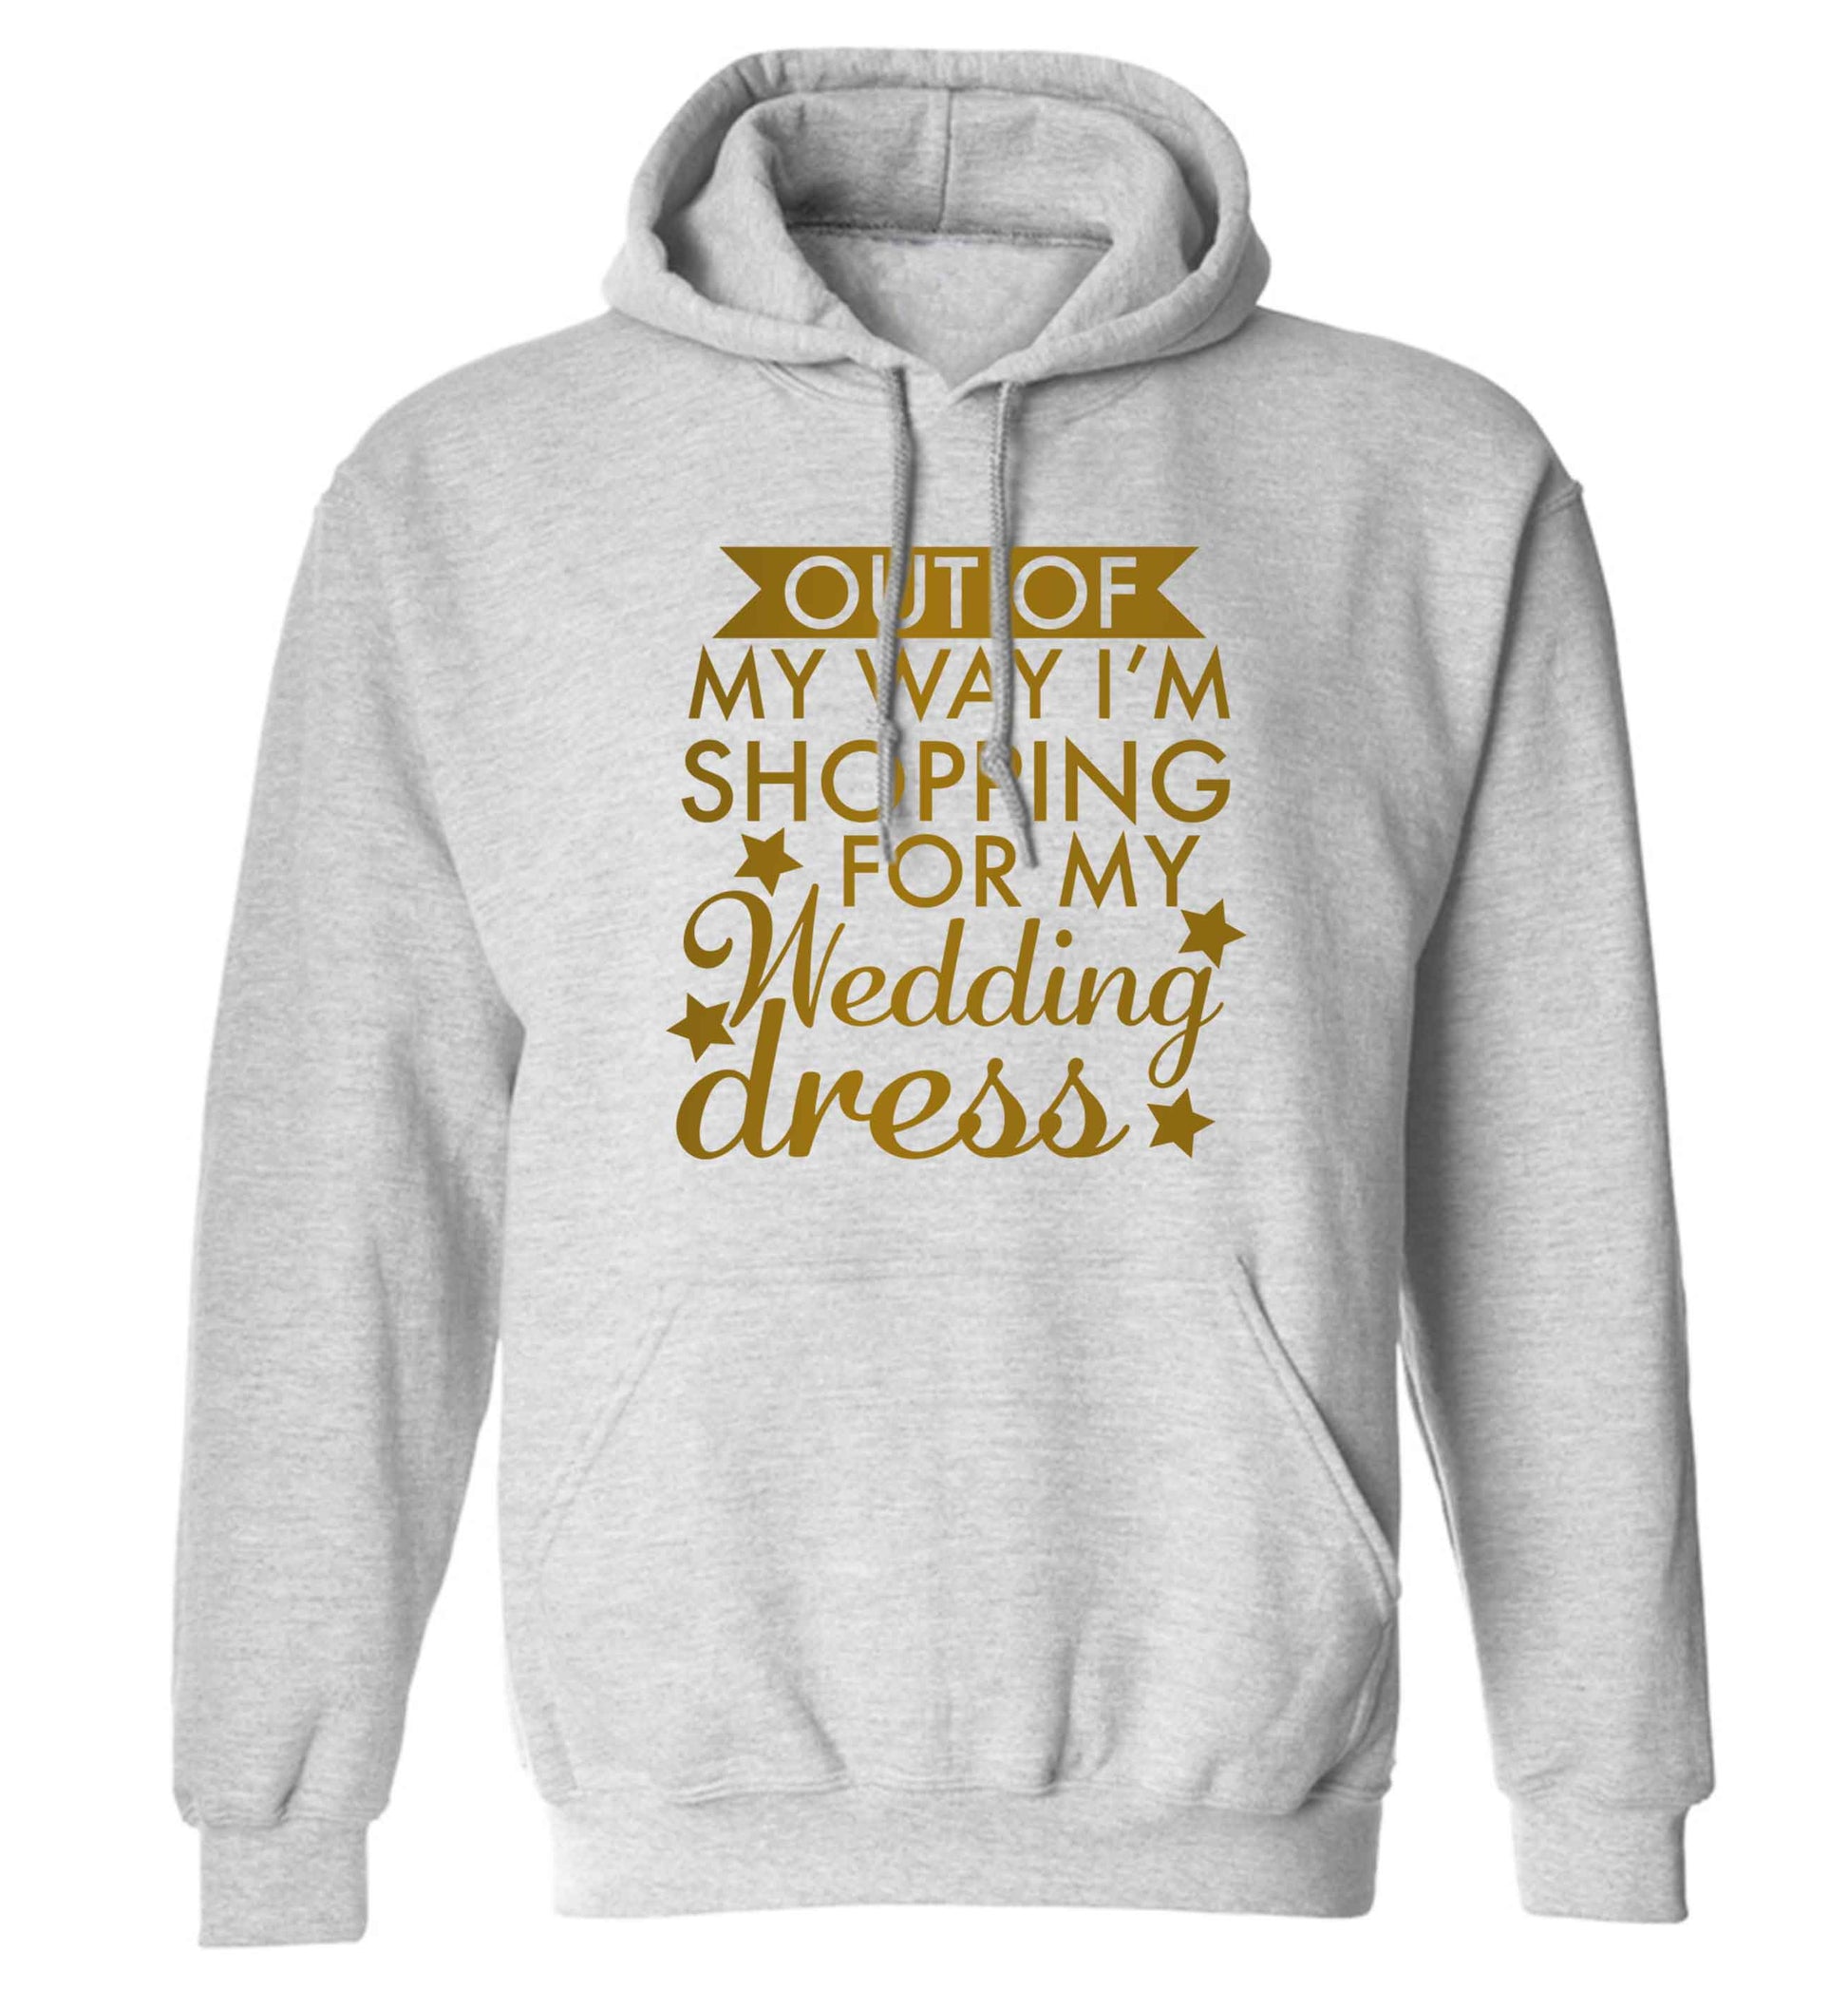 Out of my way I'm shopping for my wedding dress adults unisex grey hoodie 2XL